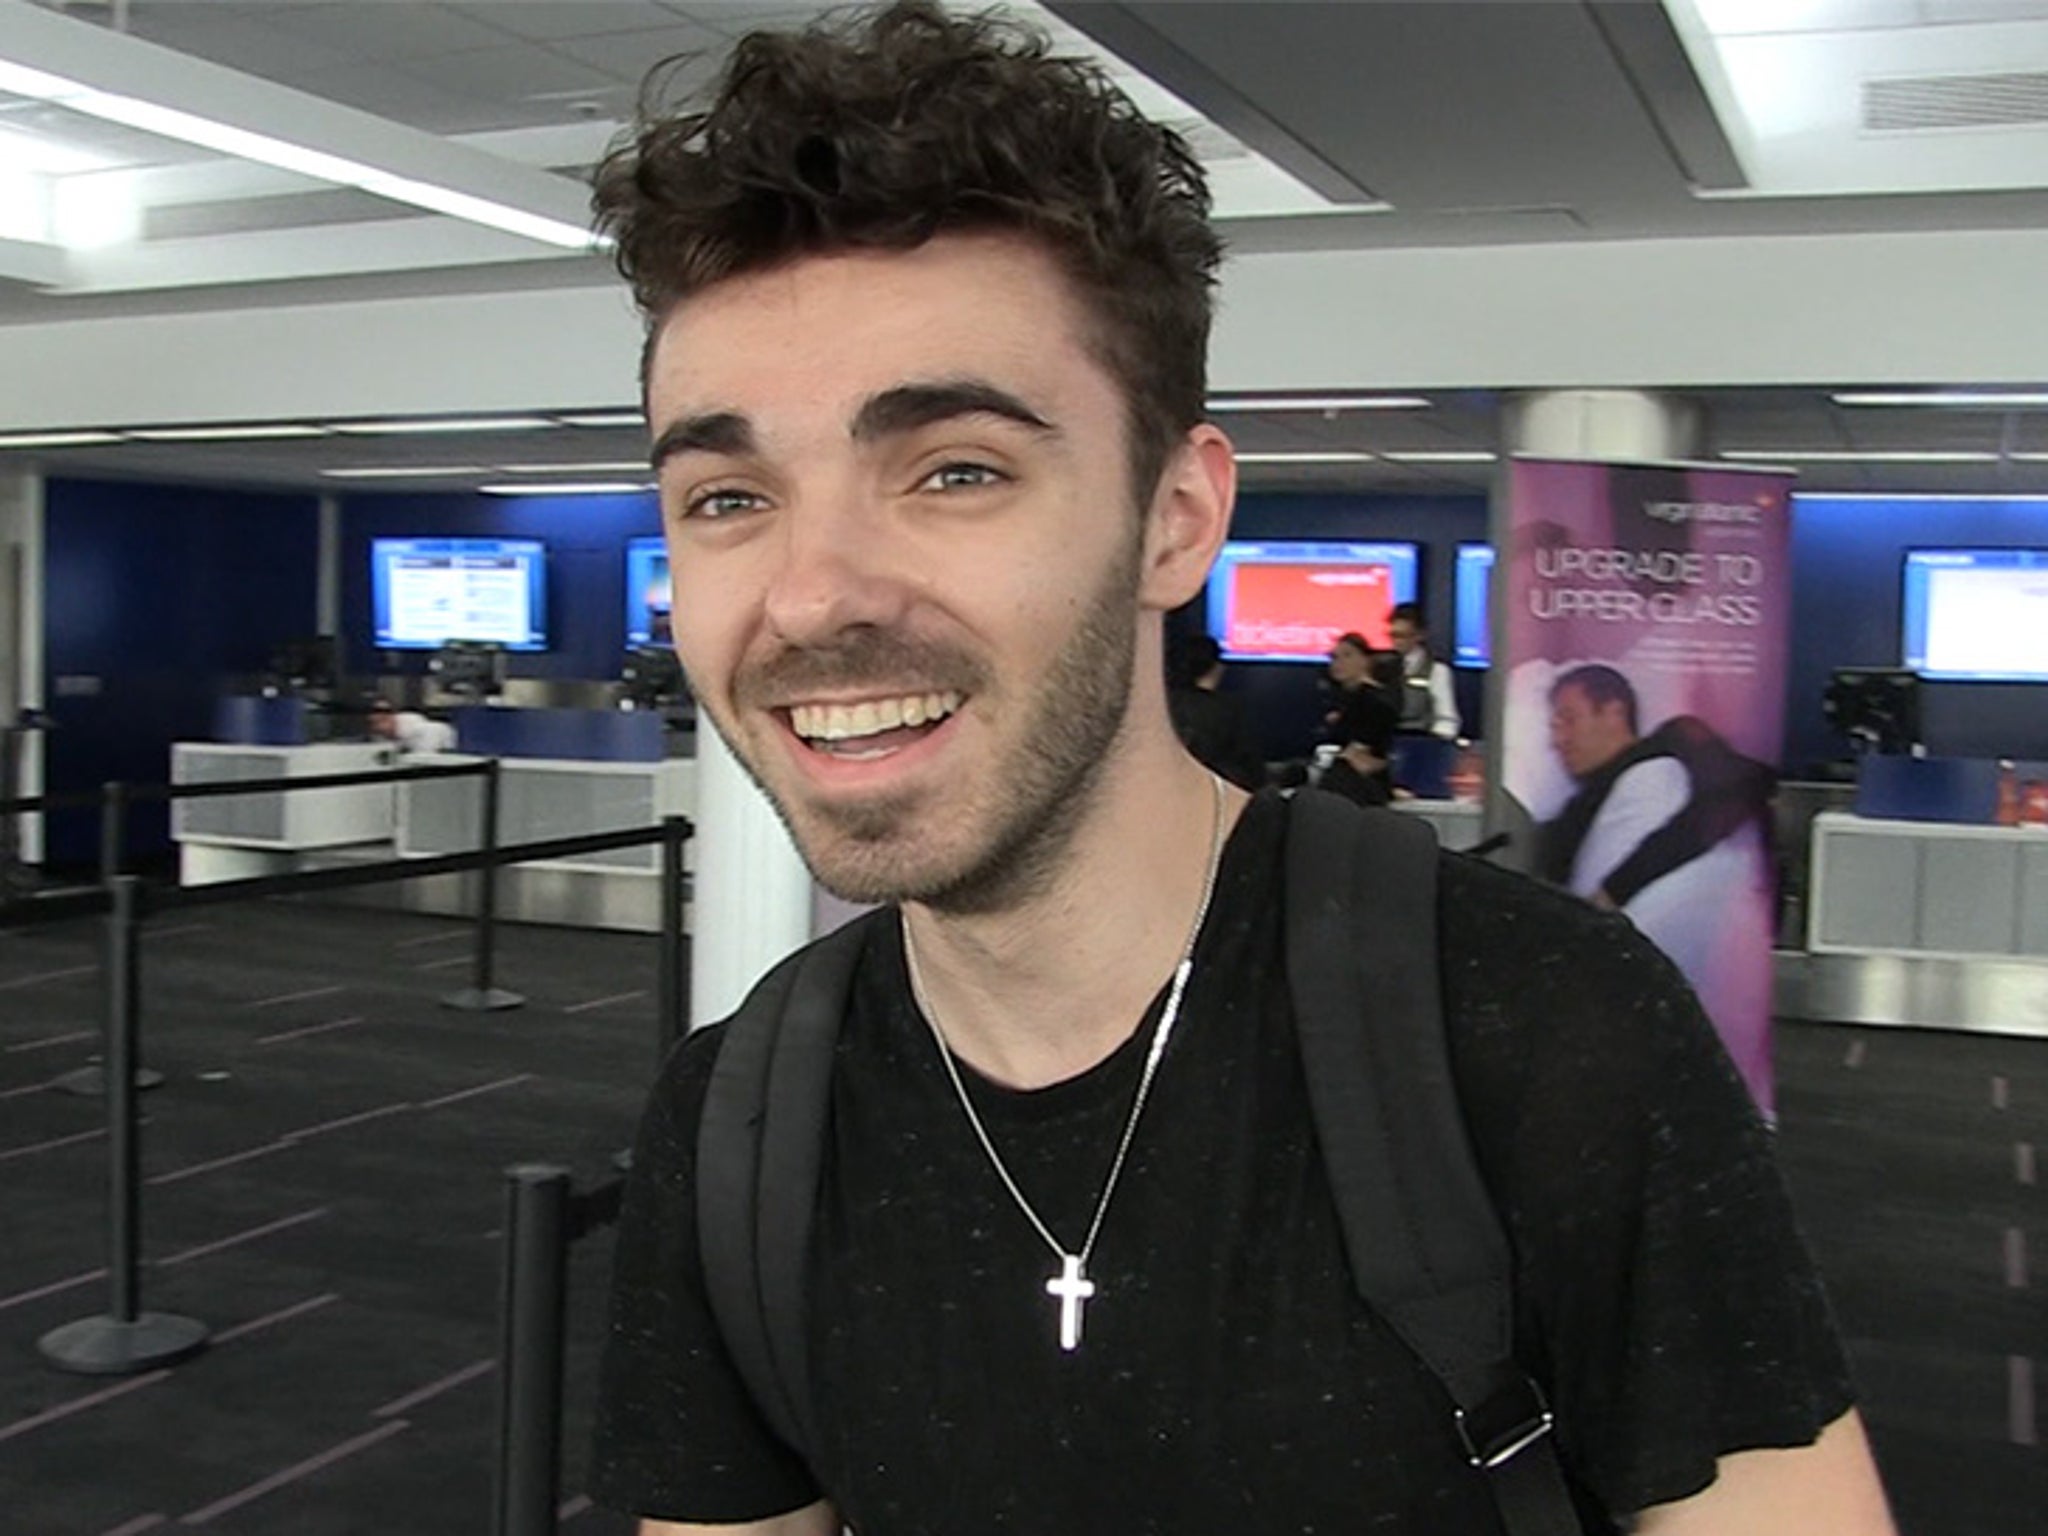 Ariana Grande's Ex, Nathan Sykes, On Being Left Out of 'thank u, next'